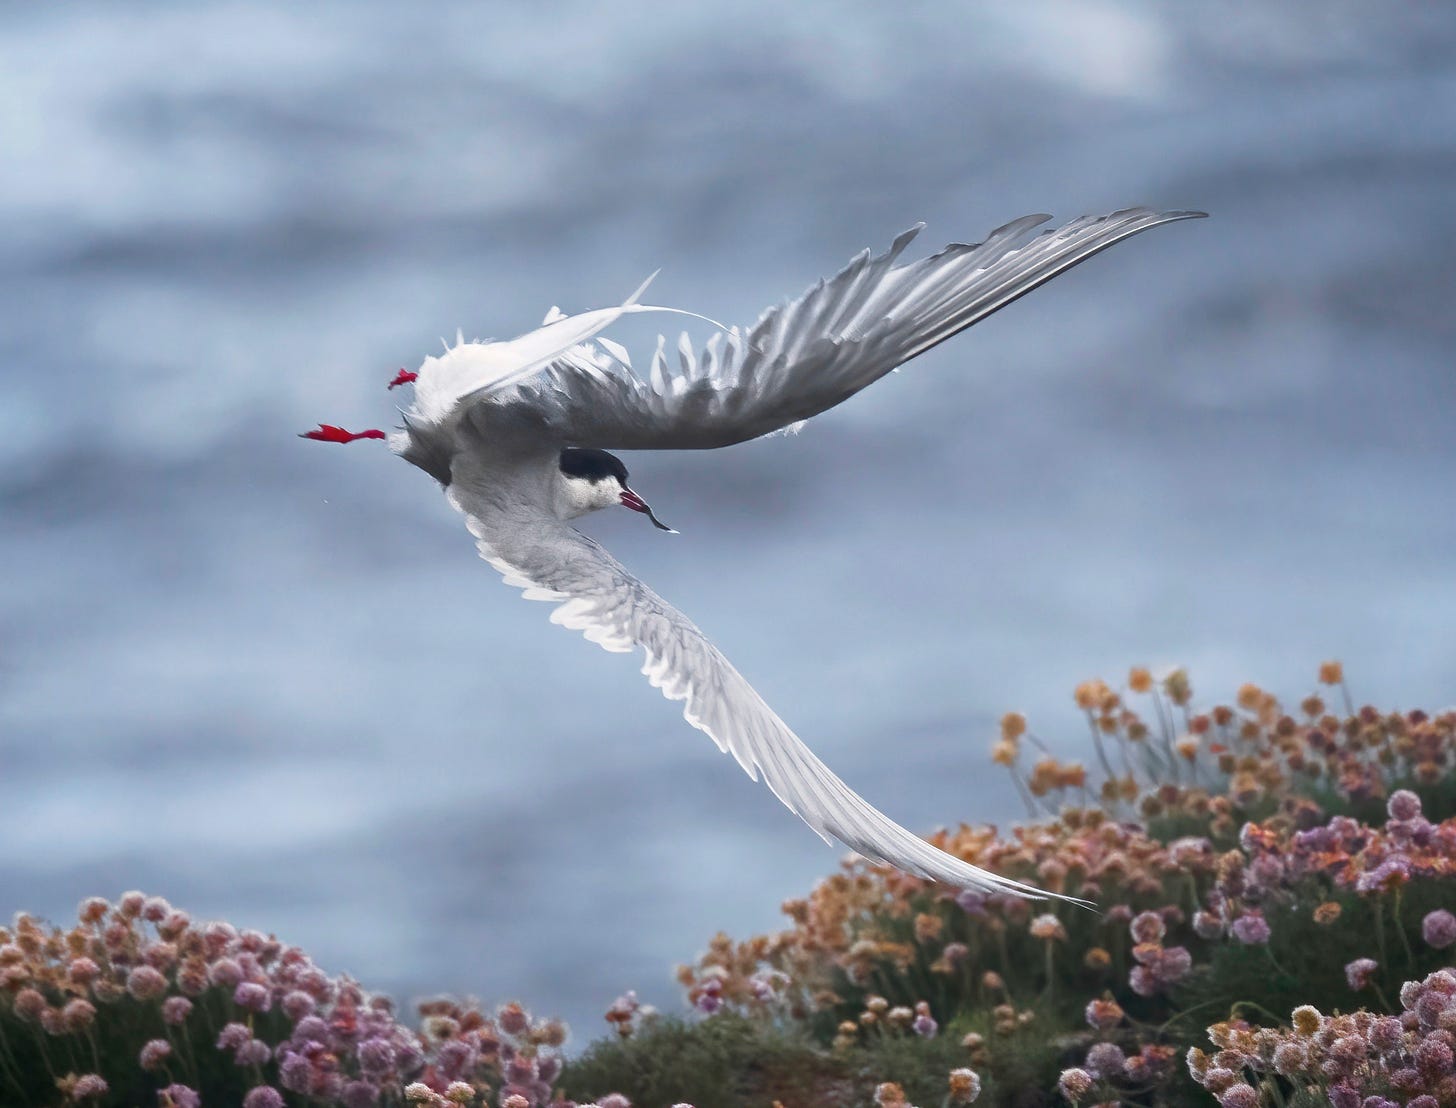 An image of an arctic tern flying over tufts of pinks in flower